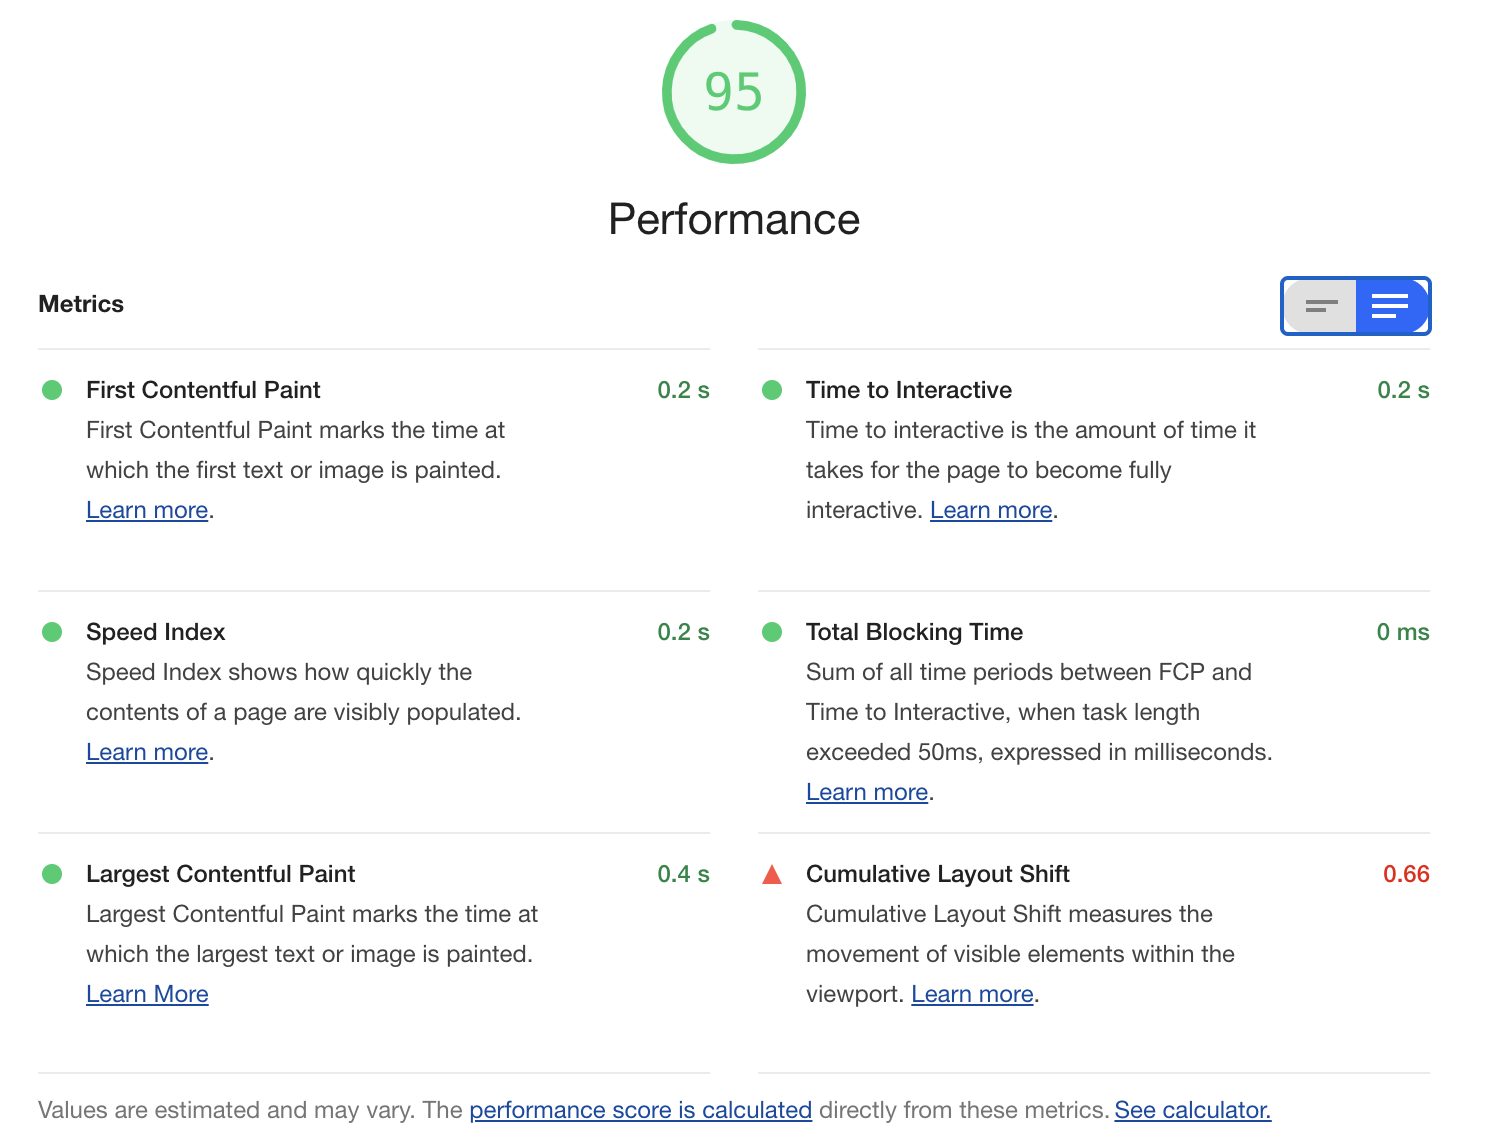 Screenshot of Lighthouse performance report, with the value at 95 and descriptions of the good/bad performance features